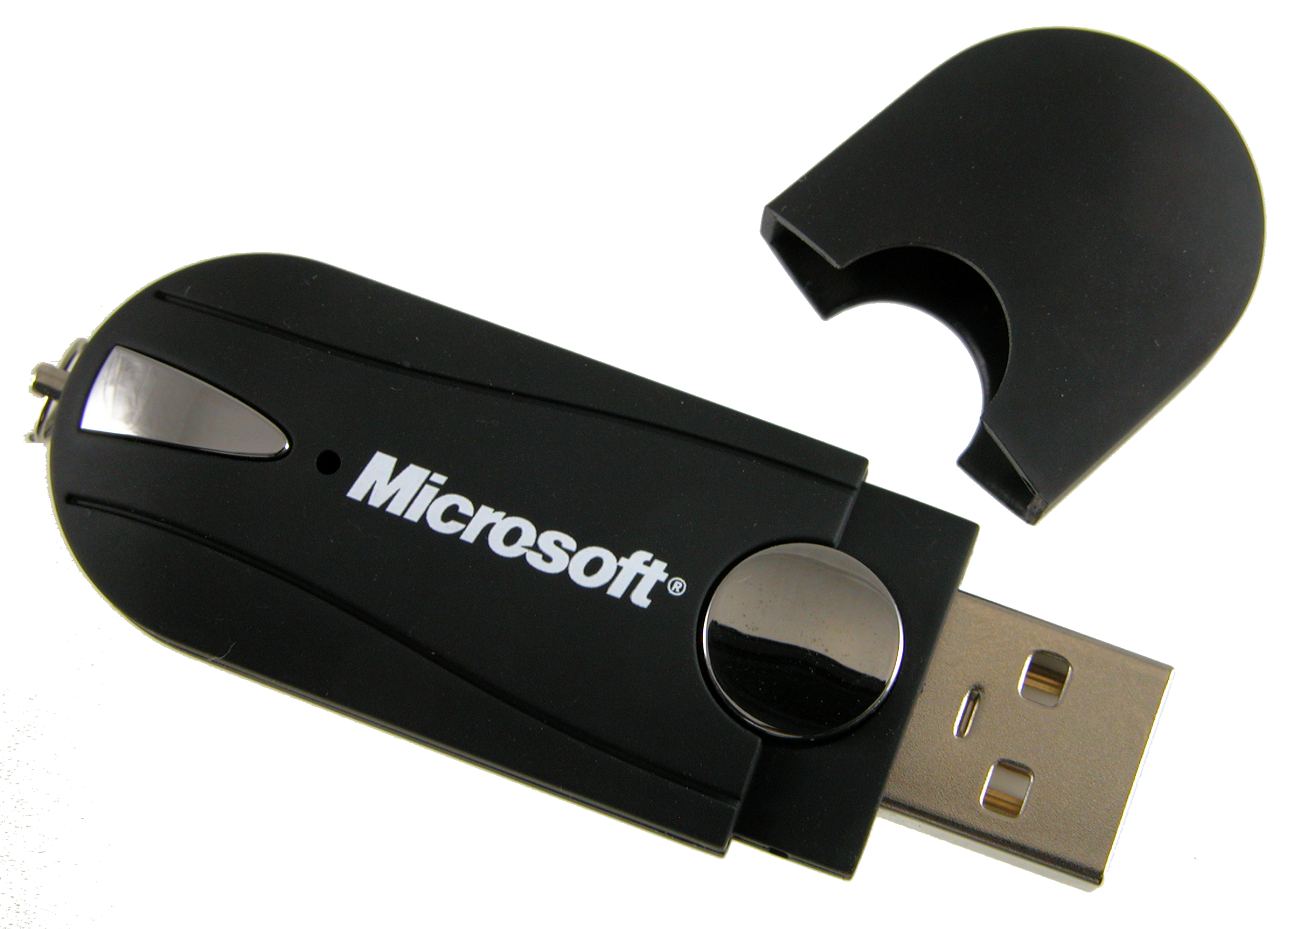 Promotional Usb Memory Stick Black With Microsft Print In White Cd233